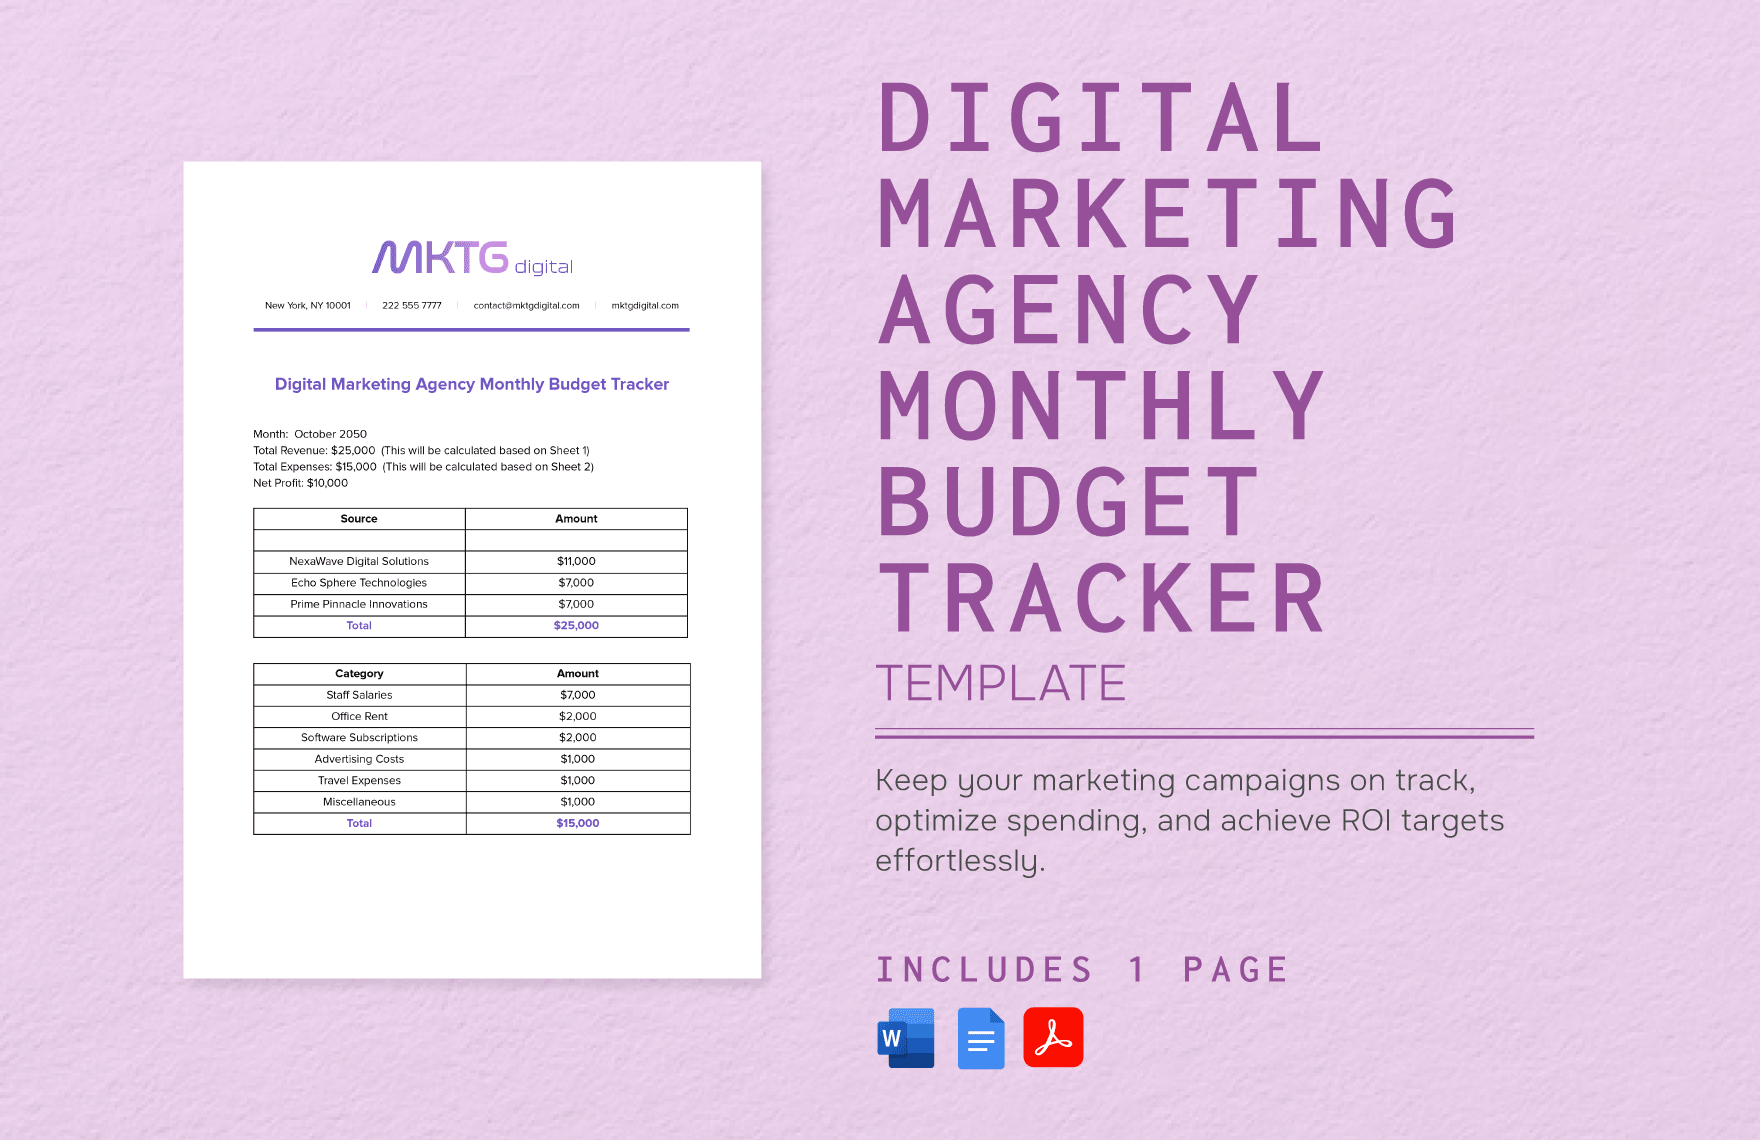 Digital Marketing Agency Monthly Budget Tracker Template